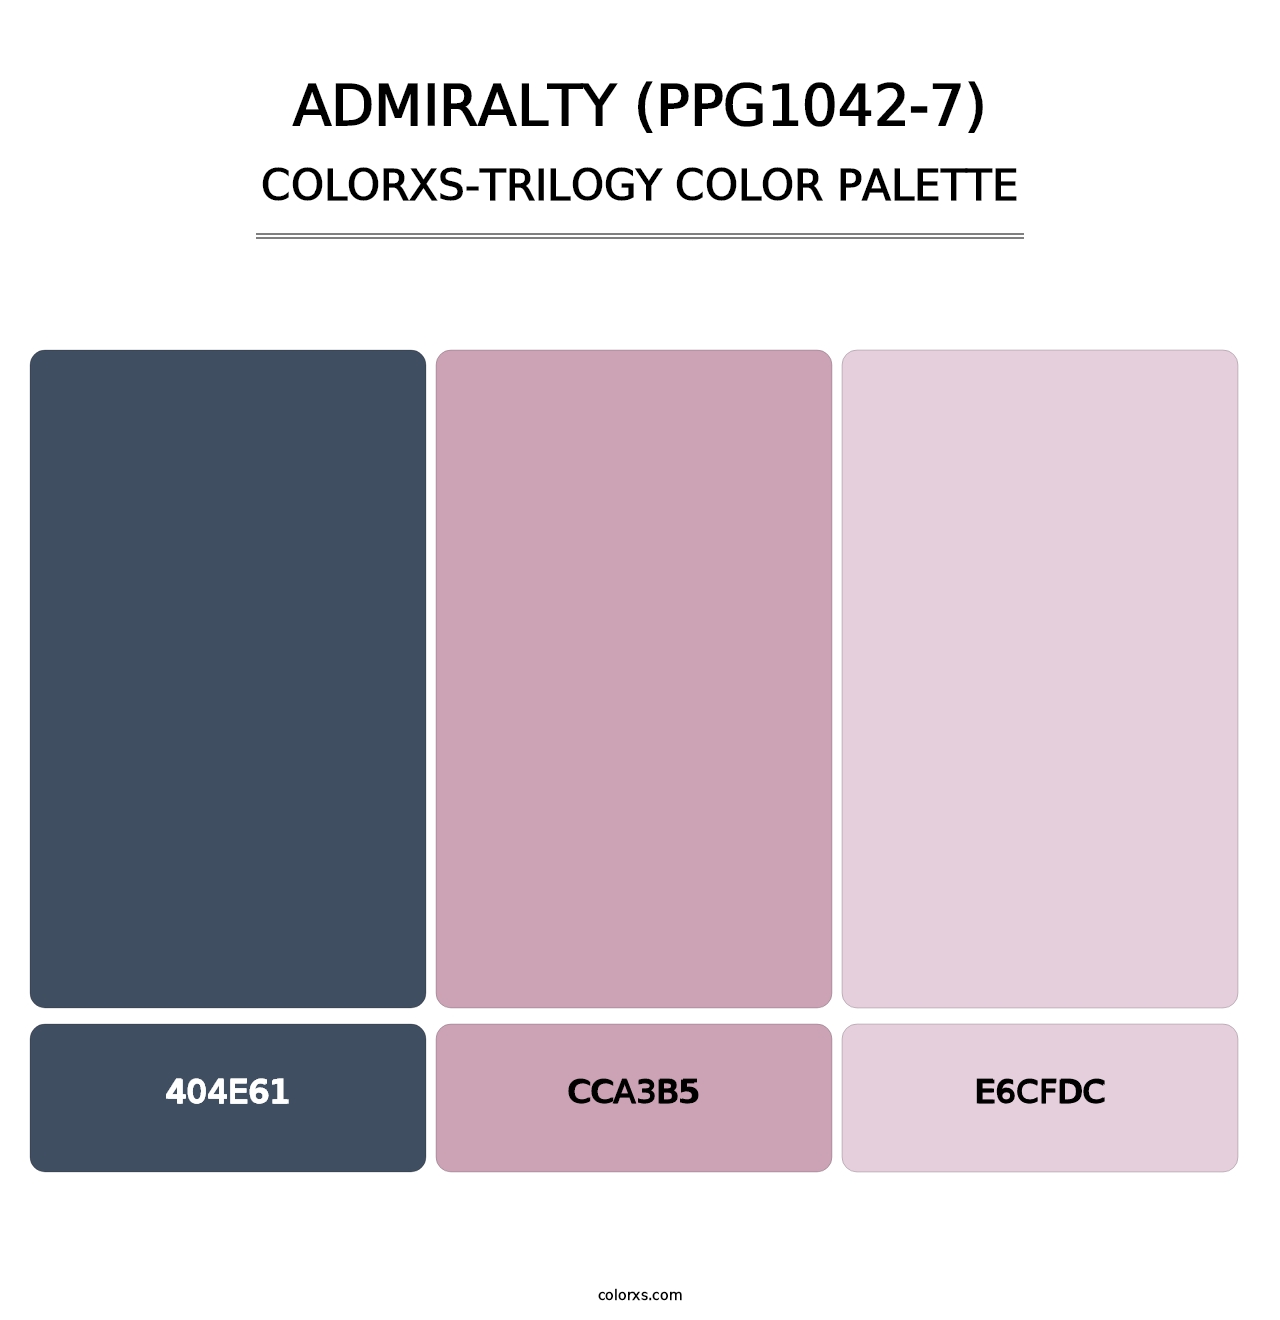 Admiralty (PPG1042-7) - Colorxs Trilogy Palette